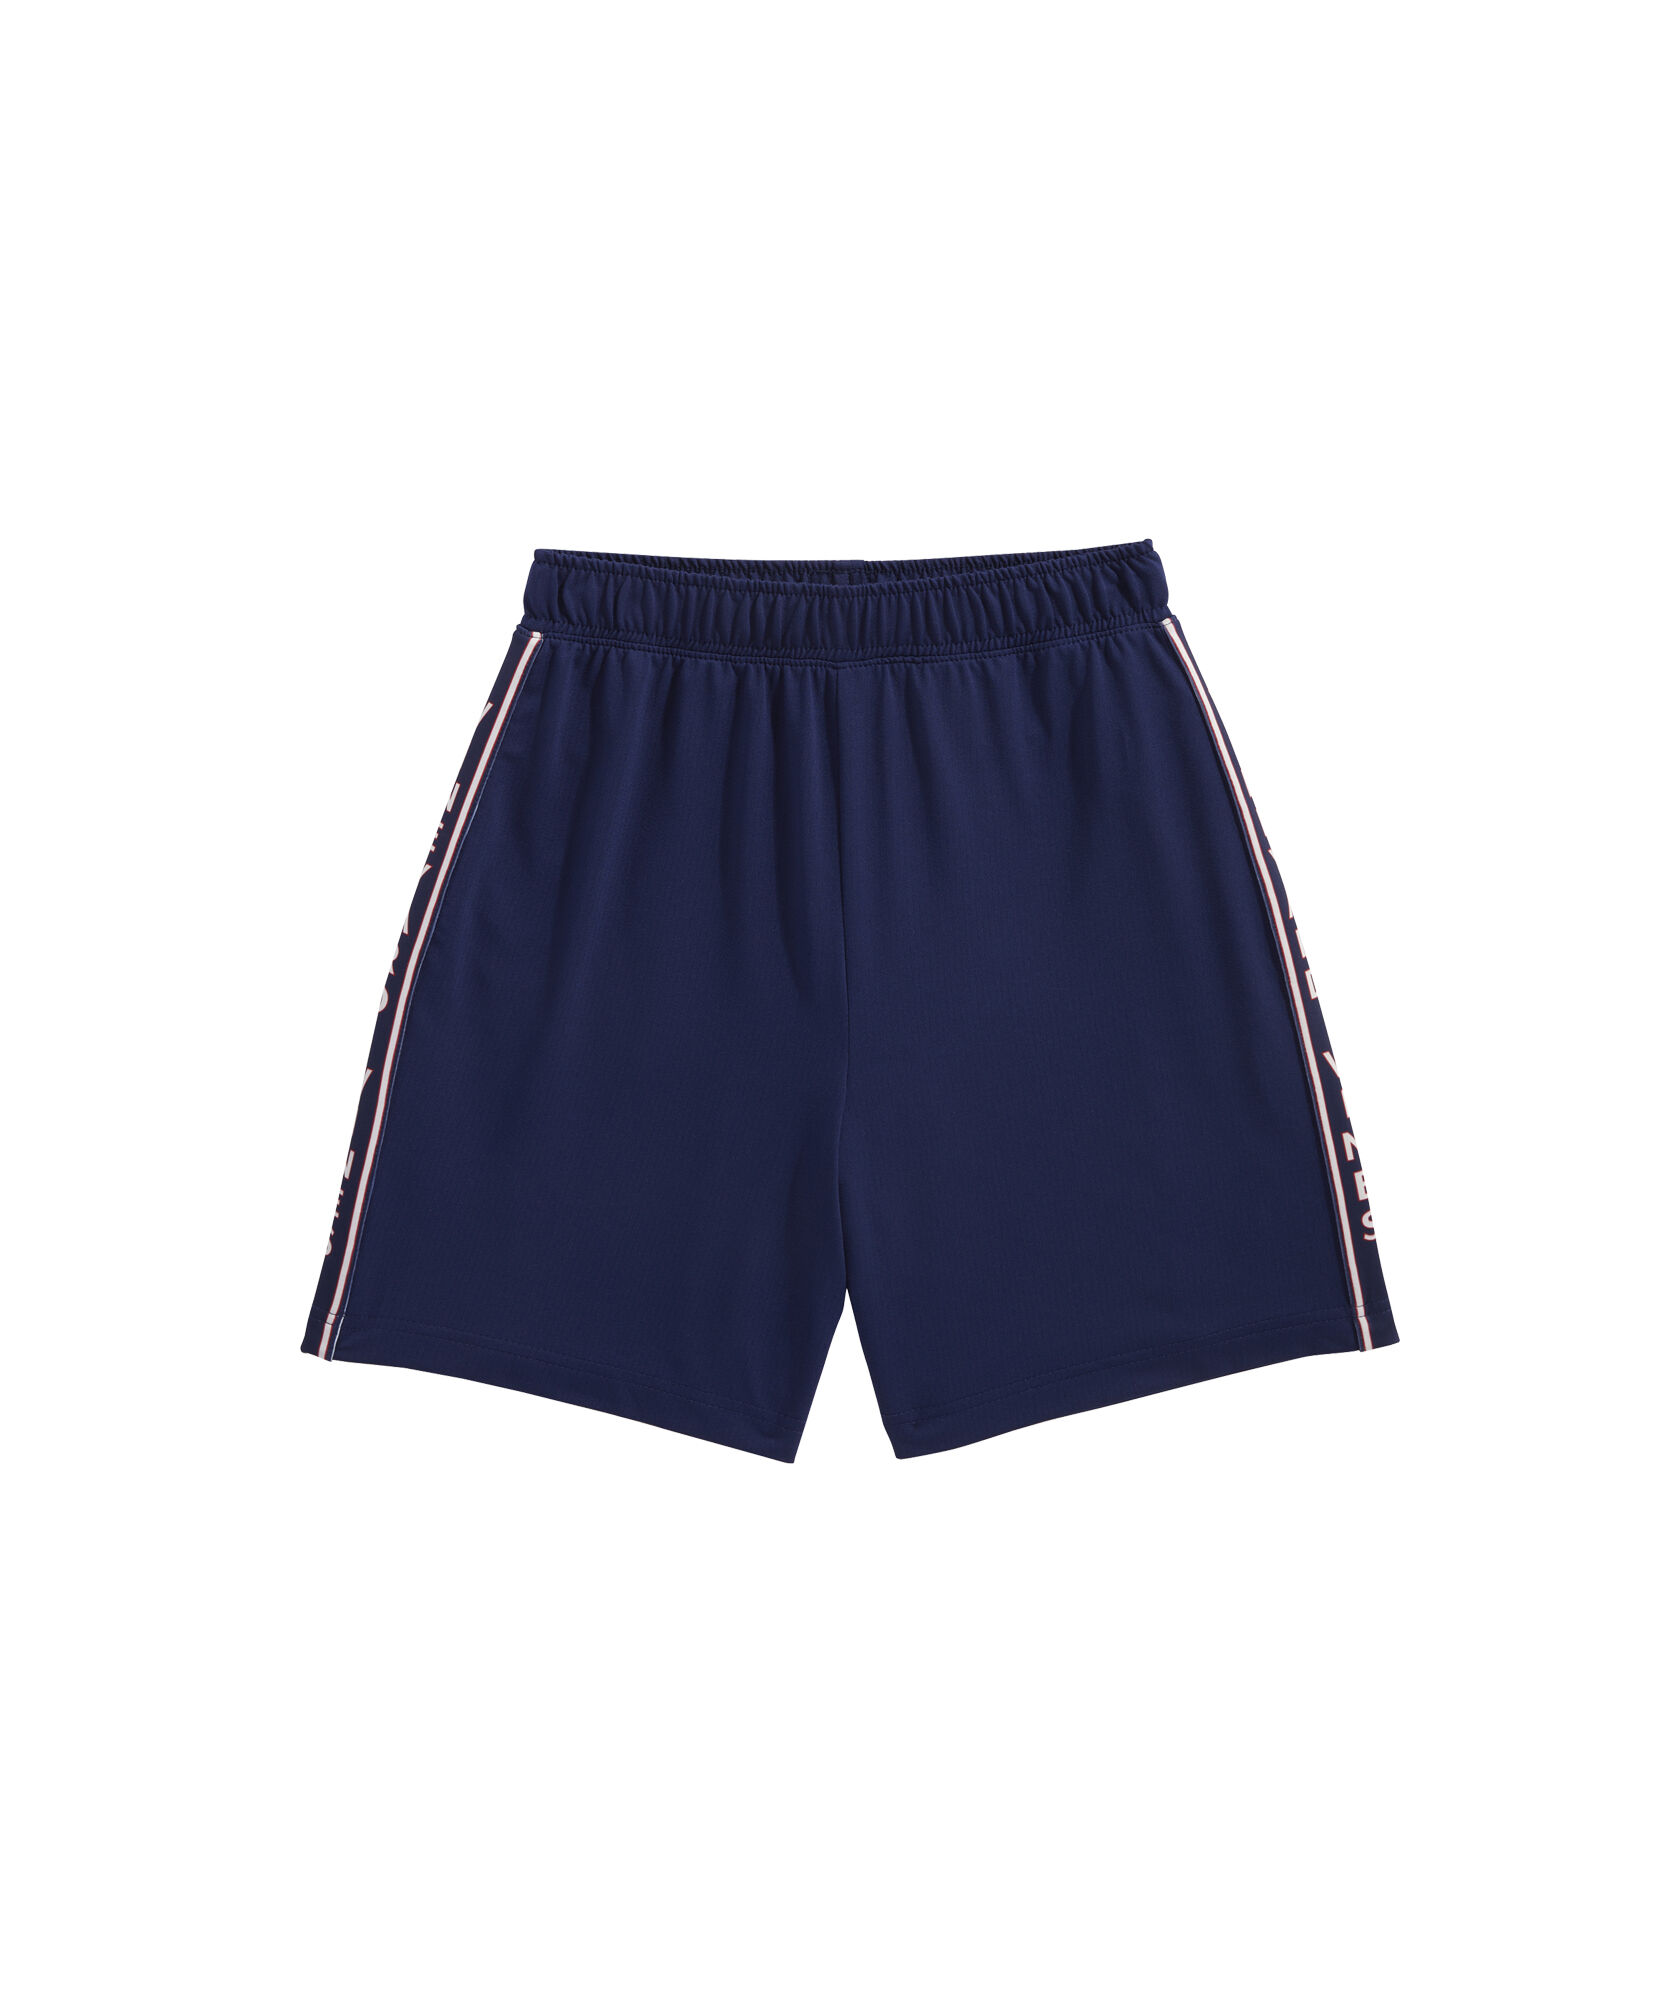 OUTLET Boys' Side Taped Lacrosse Shorts